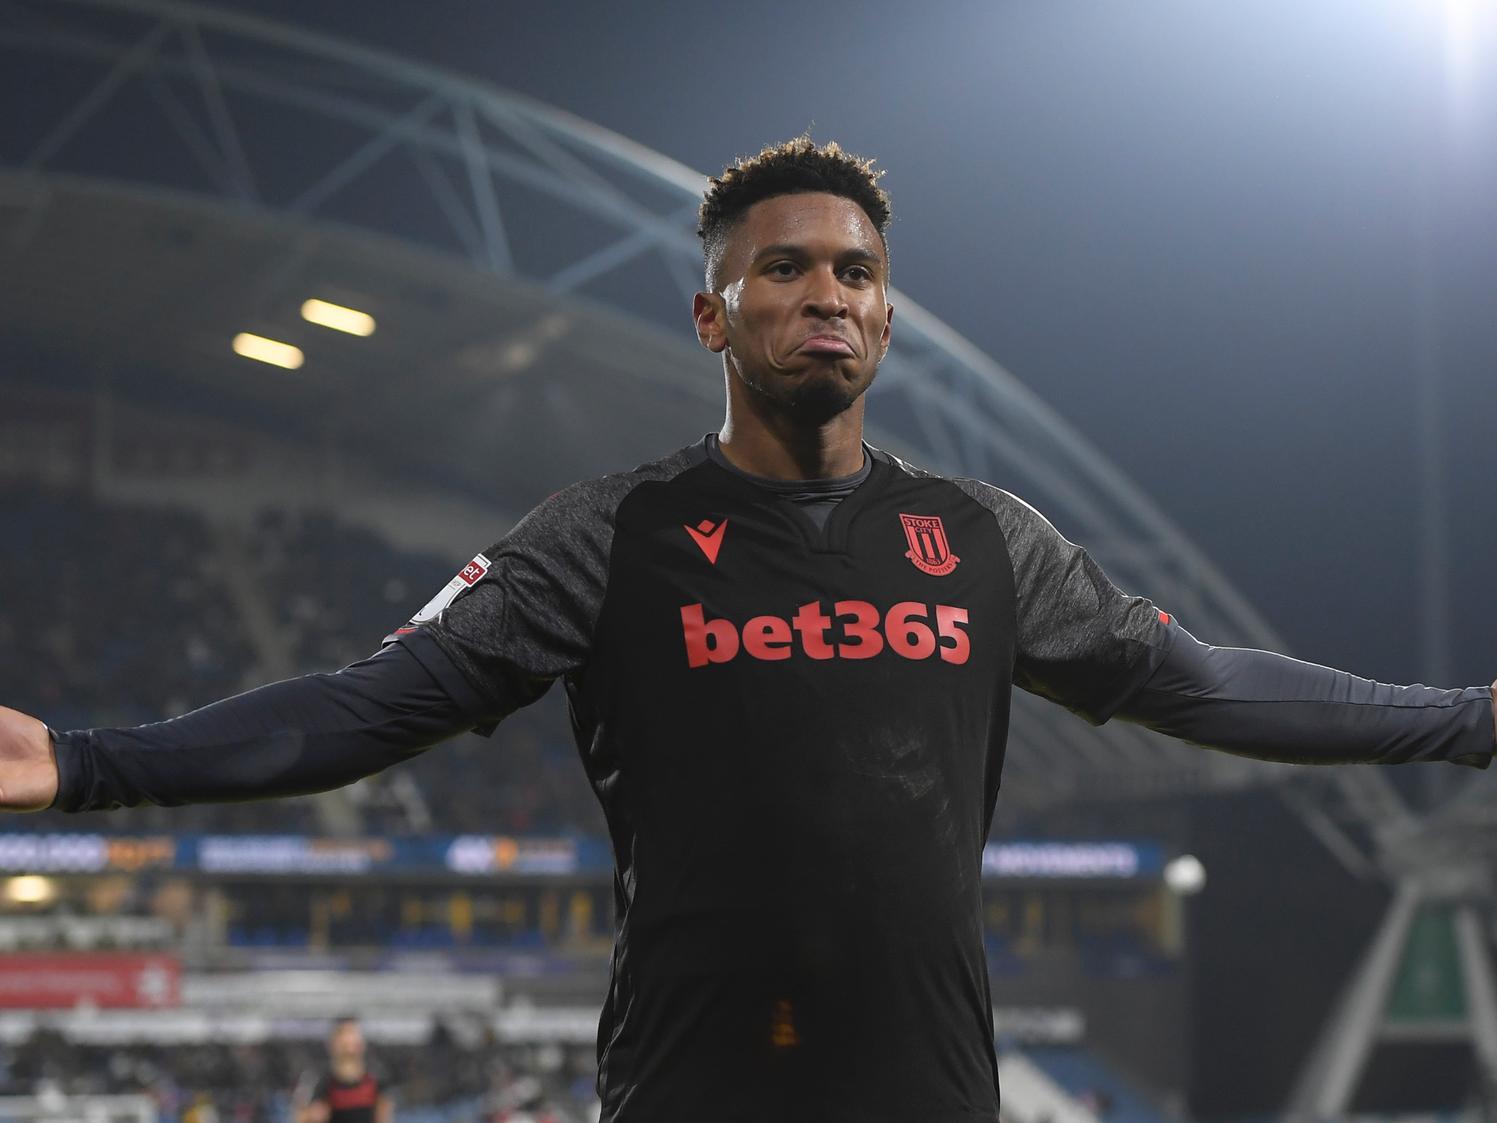 Stoke City forward Tyrese Campbell, who is said to be a target of both Rangers and Celtic, has apparently turned down the opportunity for a move to the Scottish Premiership, as he is keen to remain in England. (Daily Record)